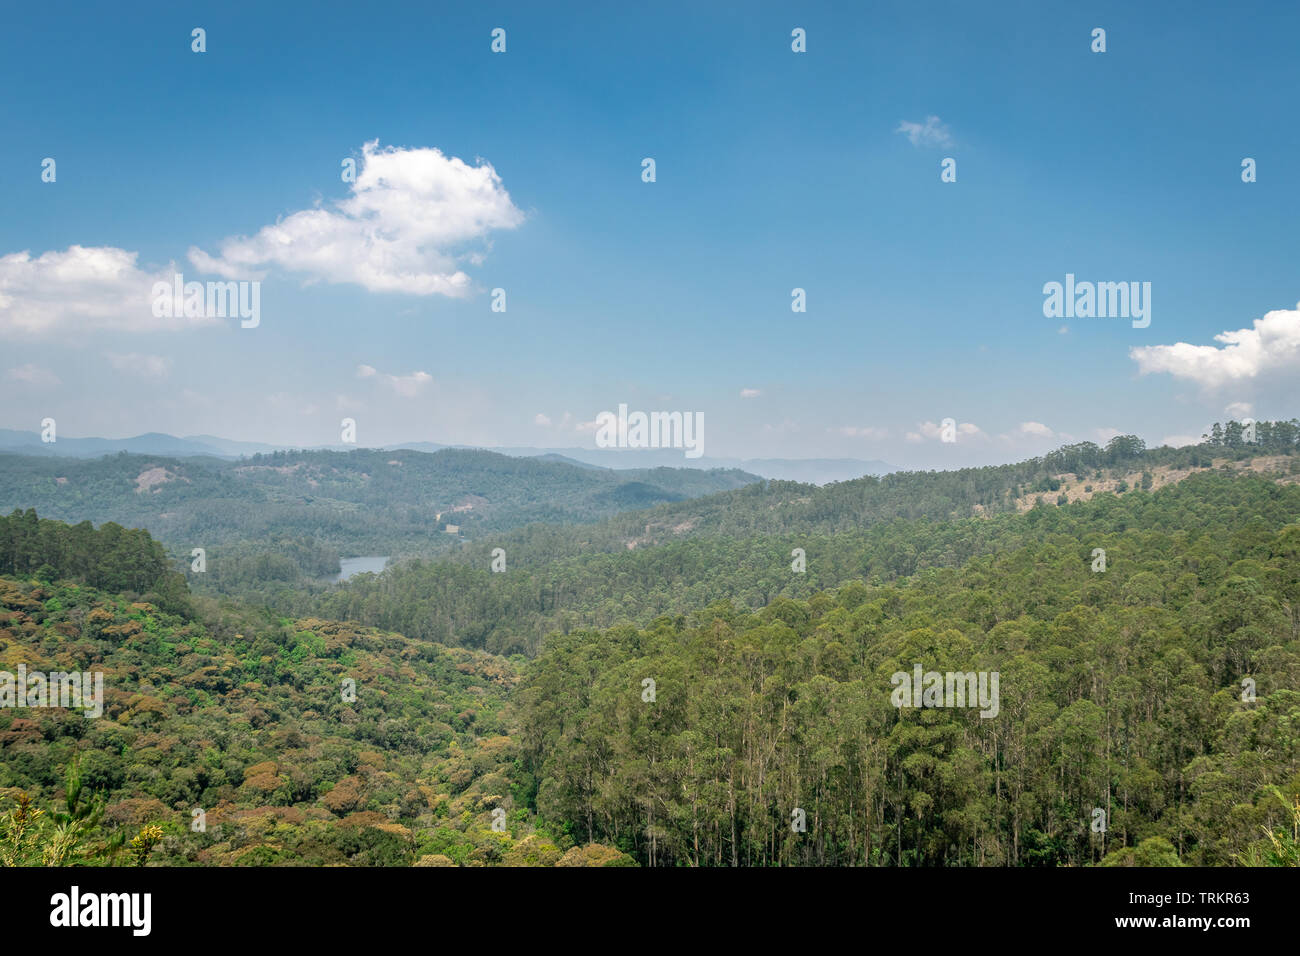 Colorful forest with blue sky image is taken at kodaikanal showing the amazing nature Stock Photo